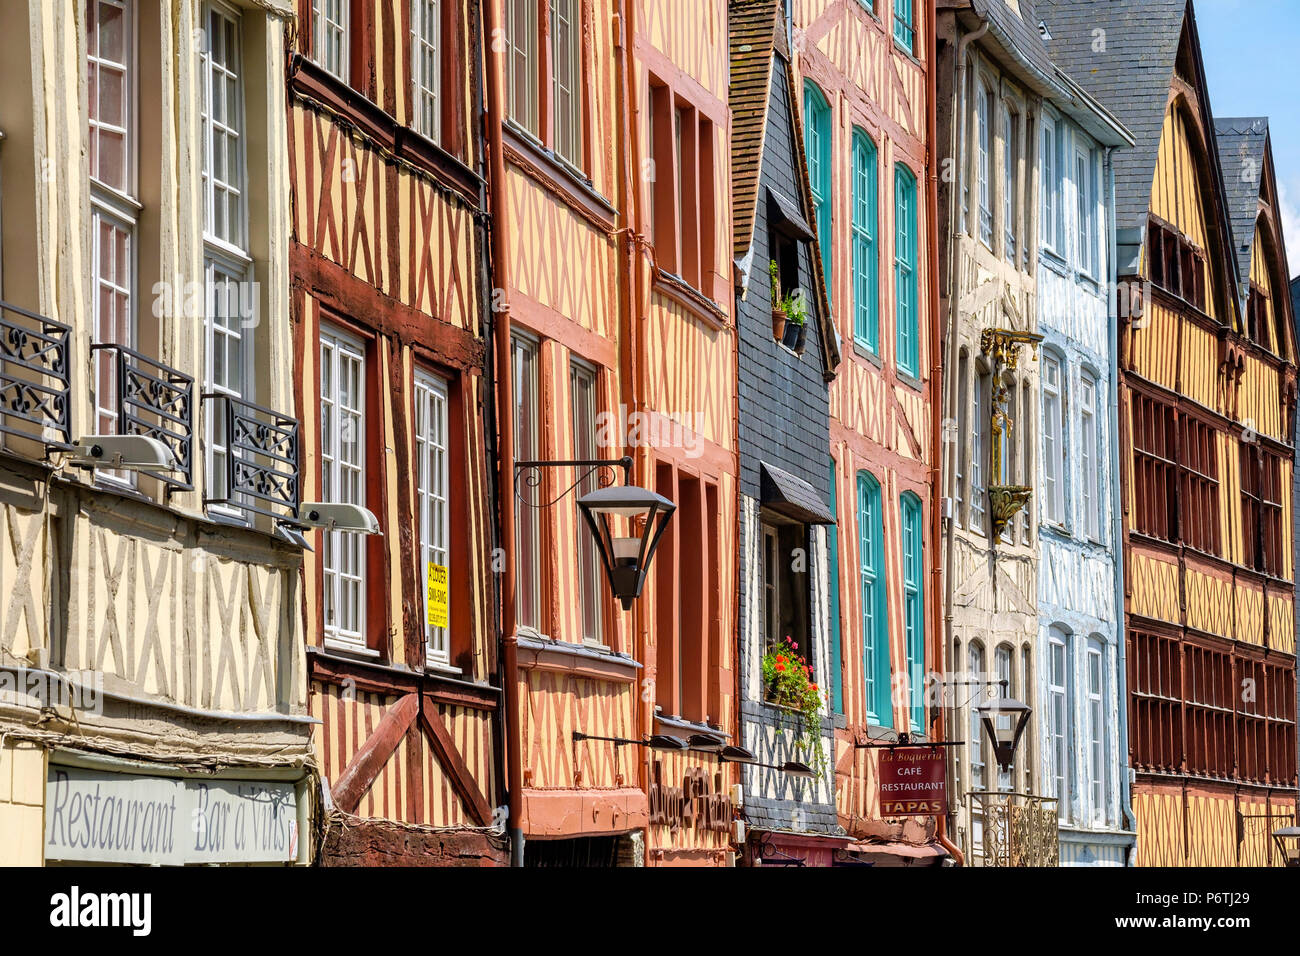 France, Normandy (Normandie), Seine-Maritime department, Rouen. Half-timbered buildings along Rue Martainville. Stock Photo